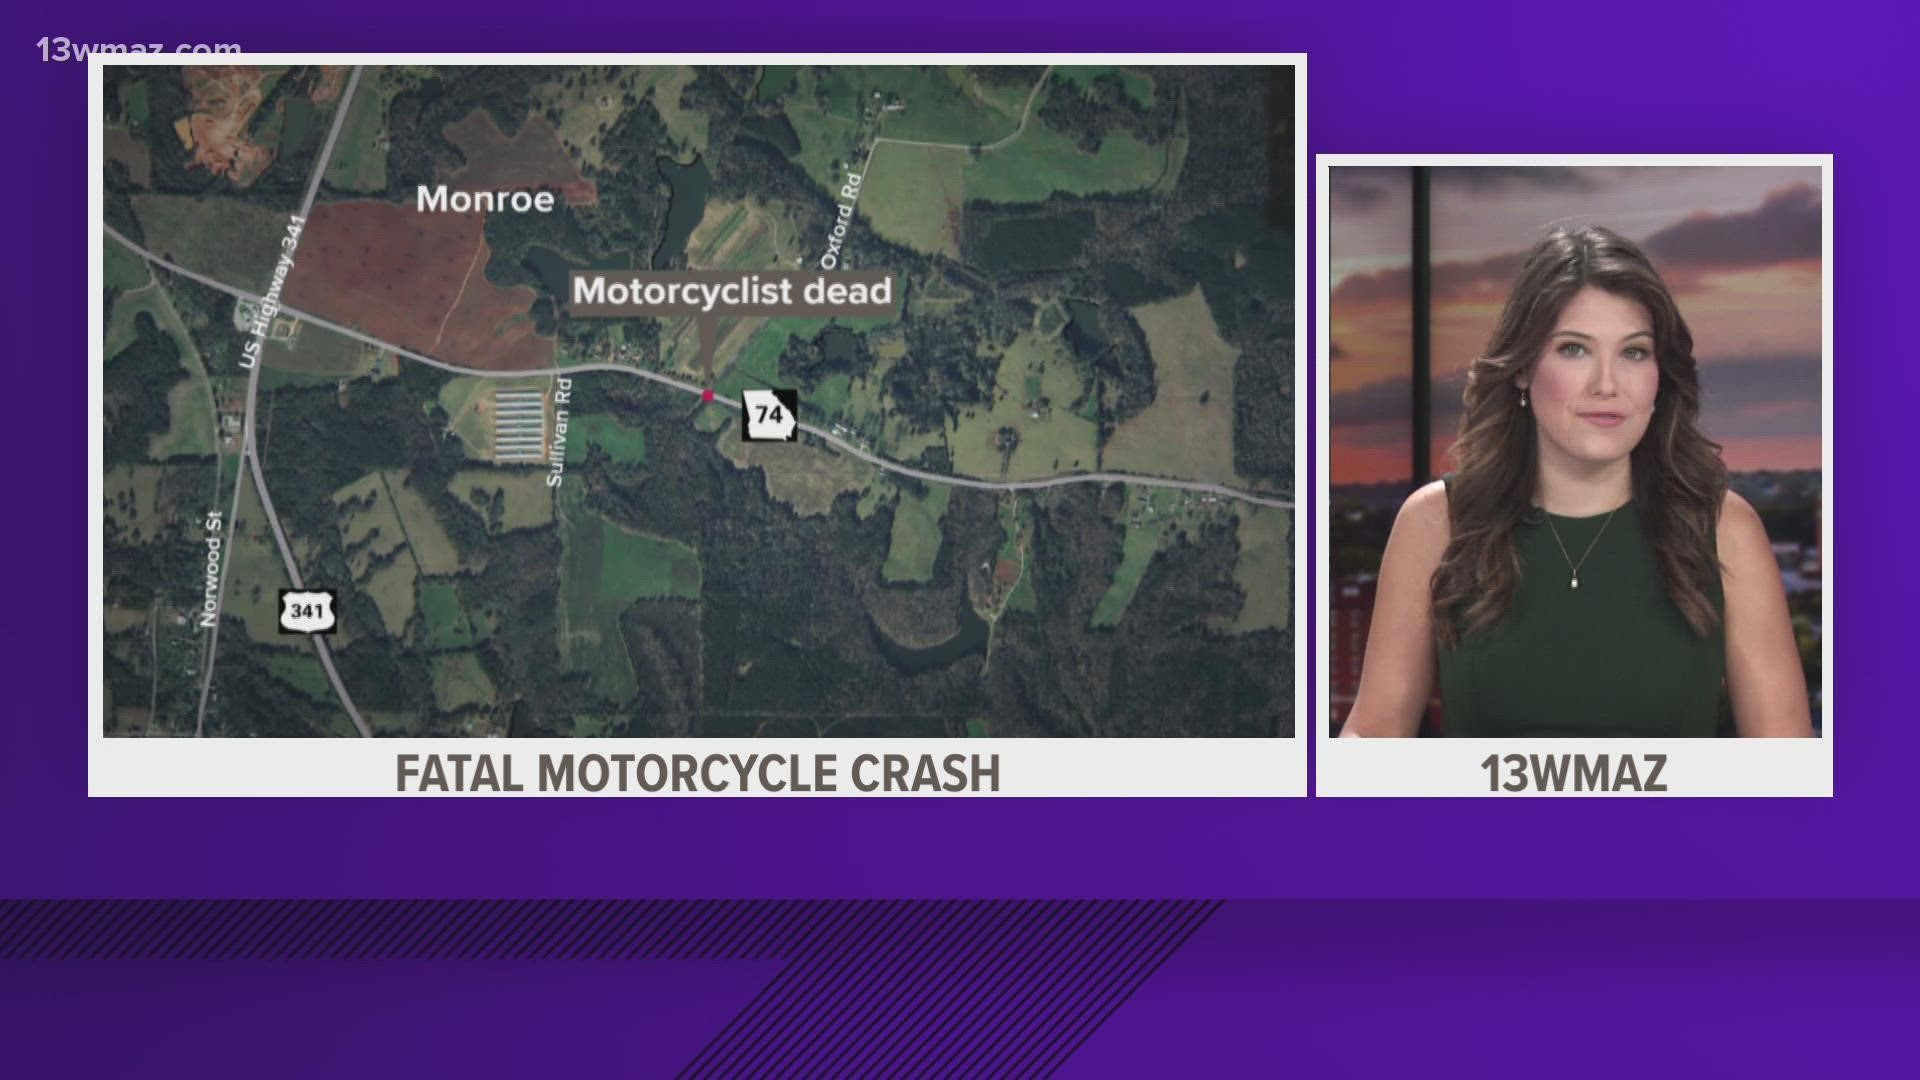 Sheriff Brad Freeman of the Monroe County Sheriff's Office says a motorcyclist is dead, and the driver of the car who hit him has been arrested.